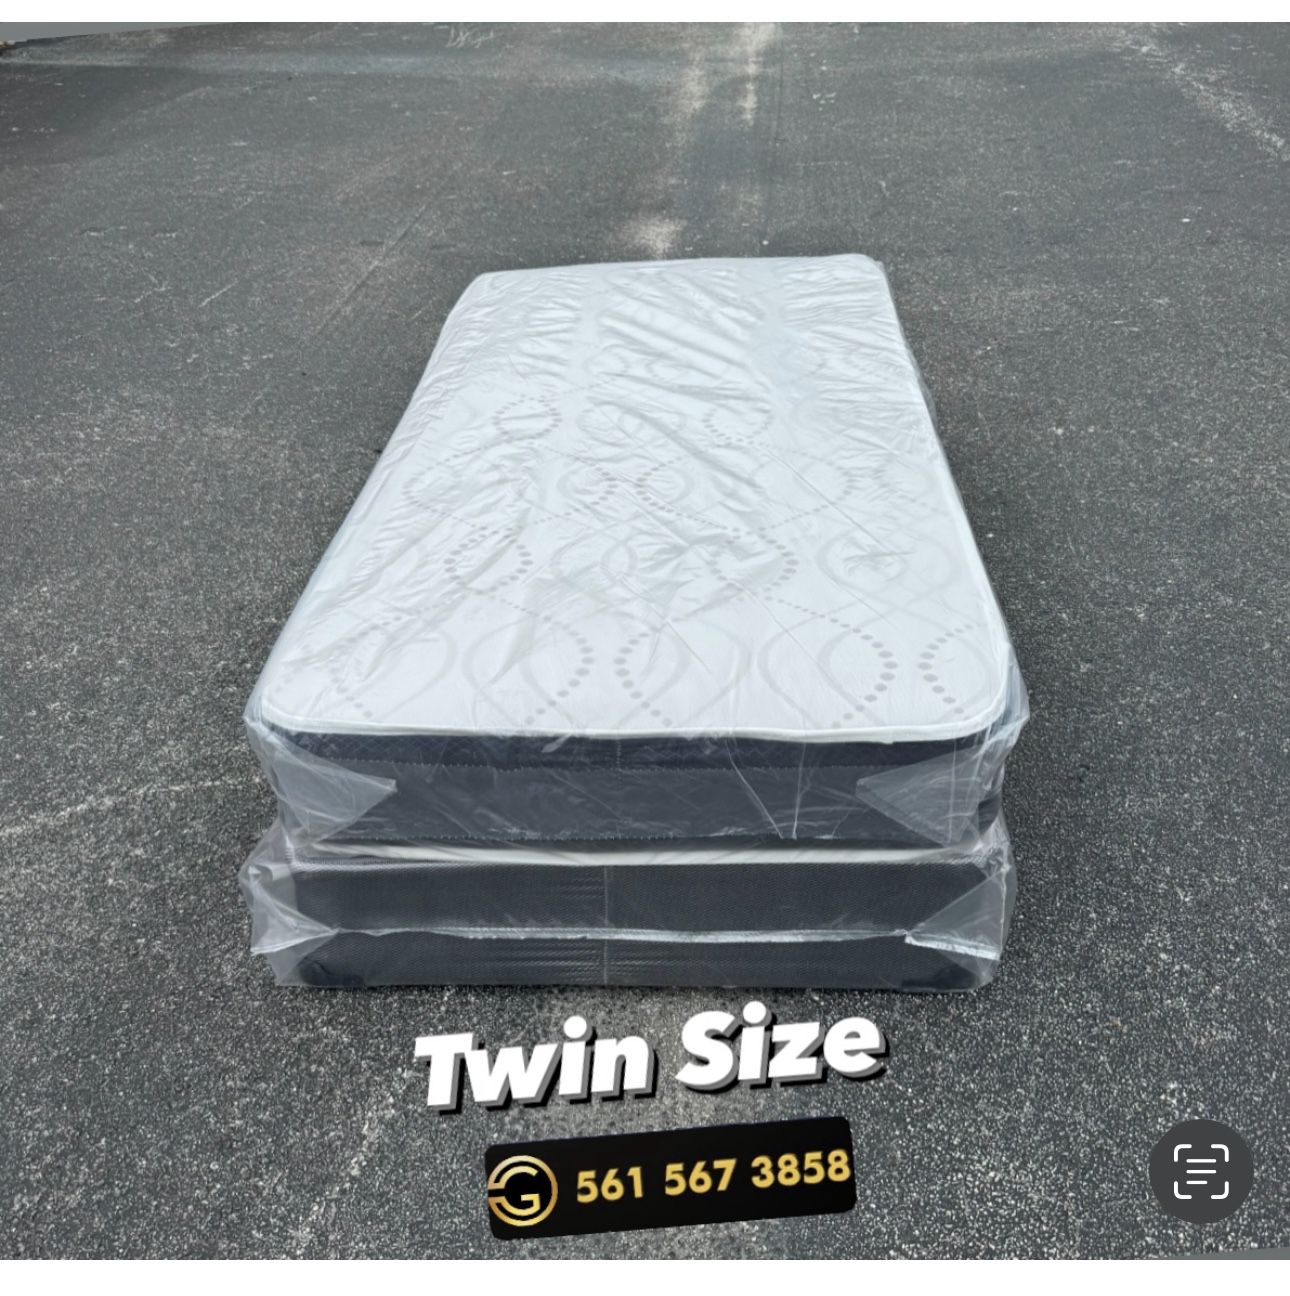 New Twin Size Mattress And Box Spring Set // We Offer  🚚